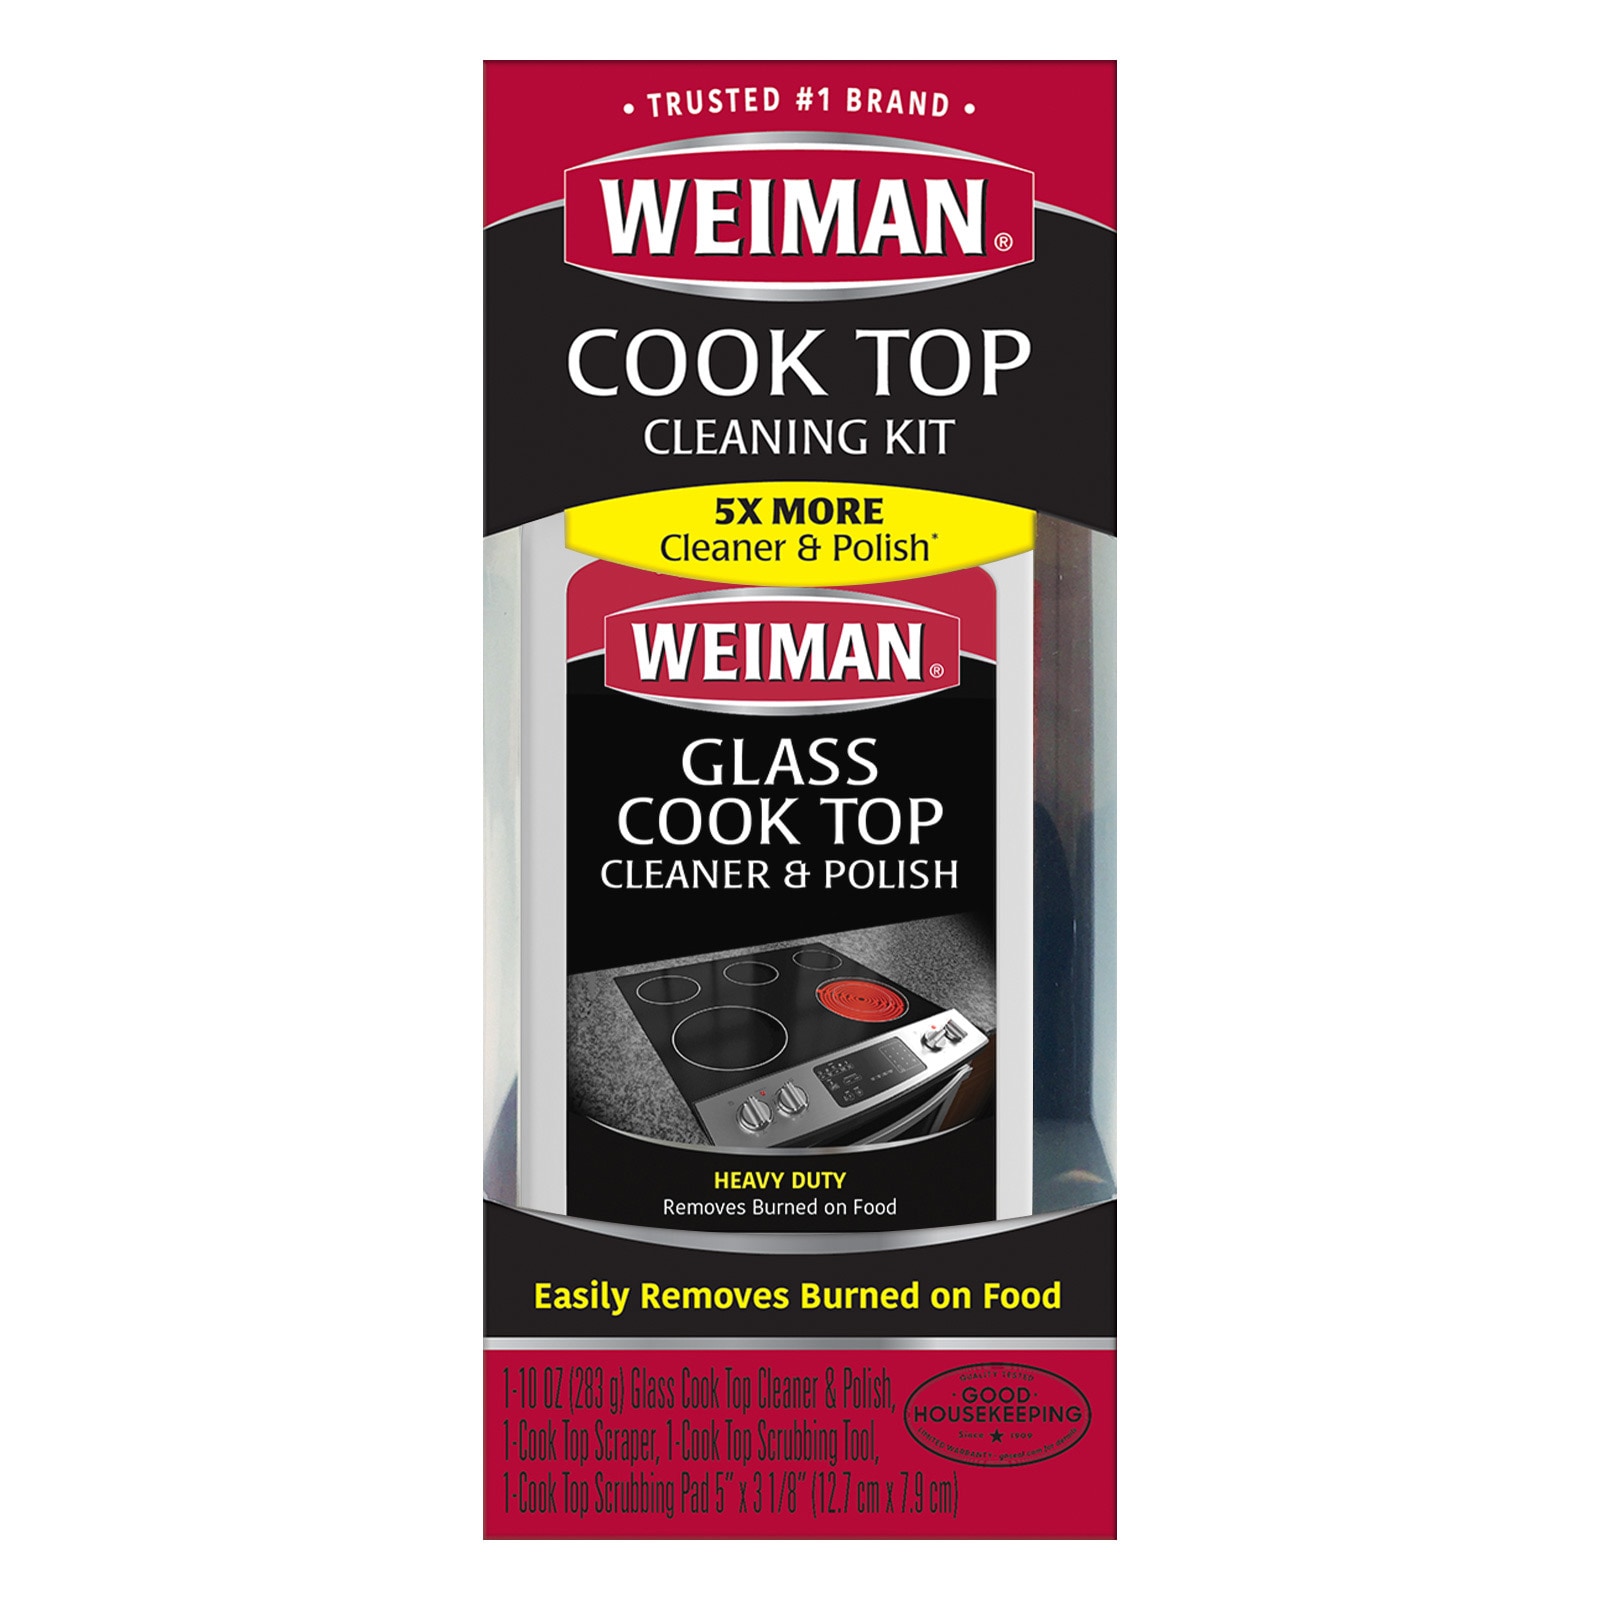 2 oz. Glass Cook Top Cleaning Kit